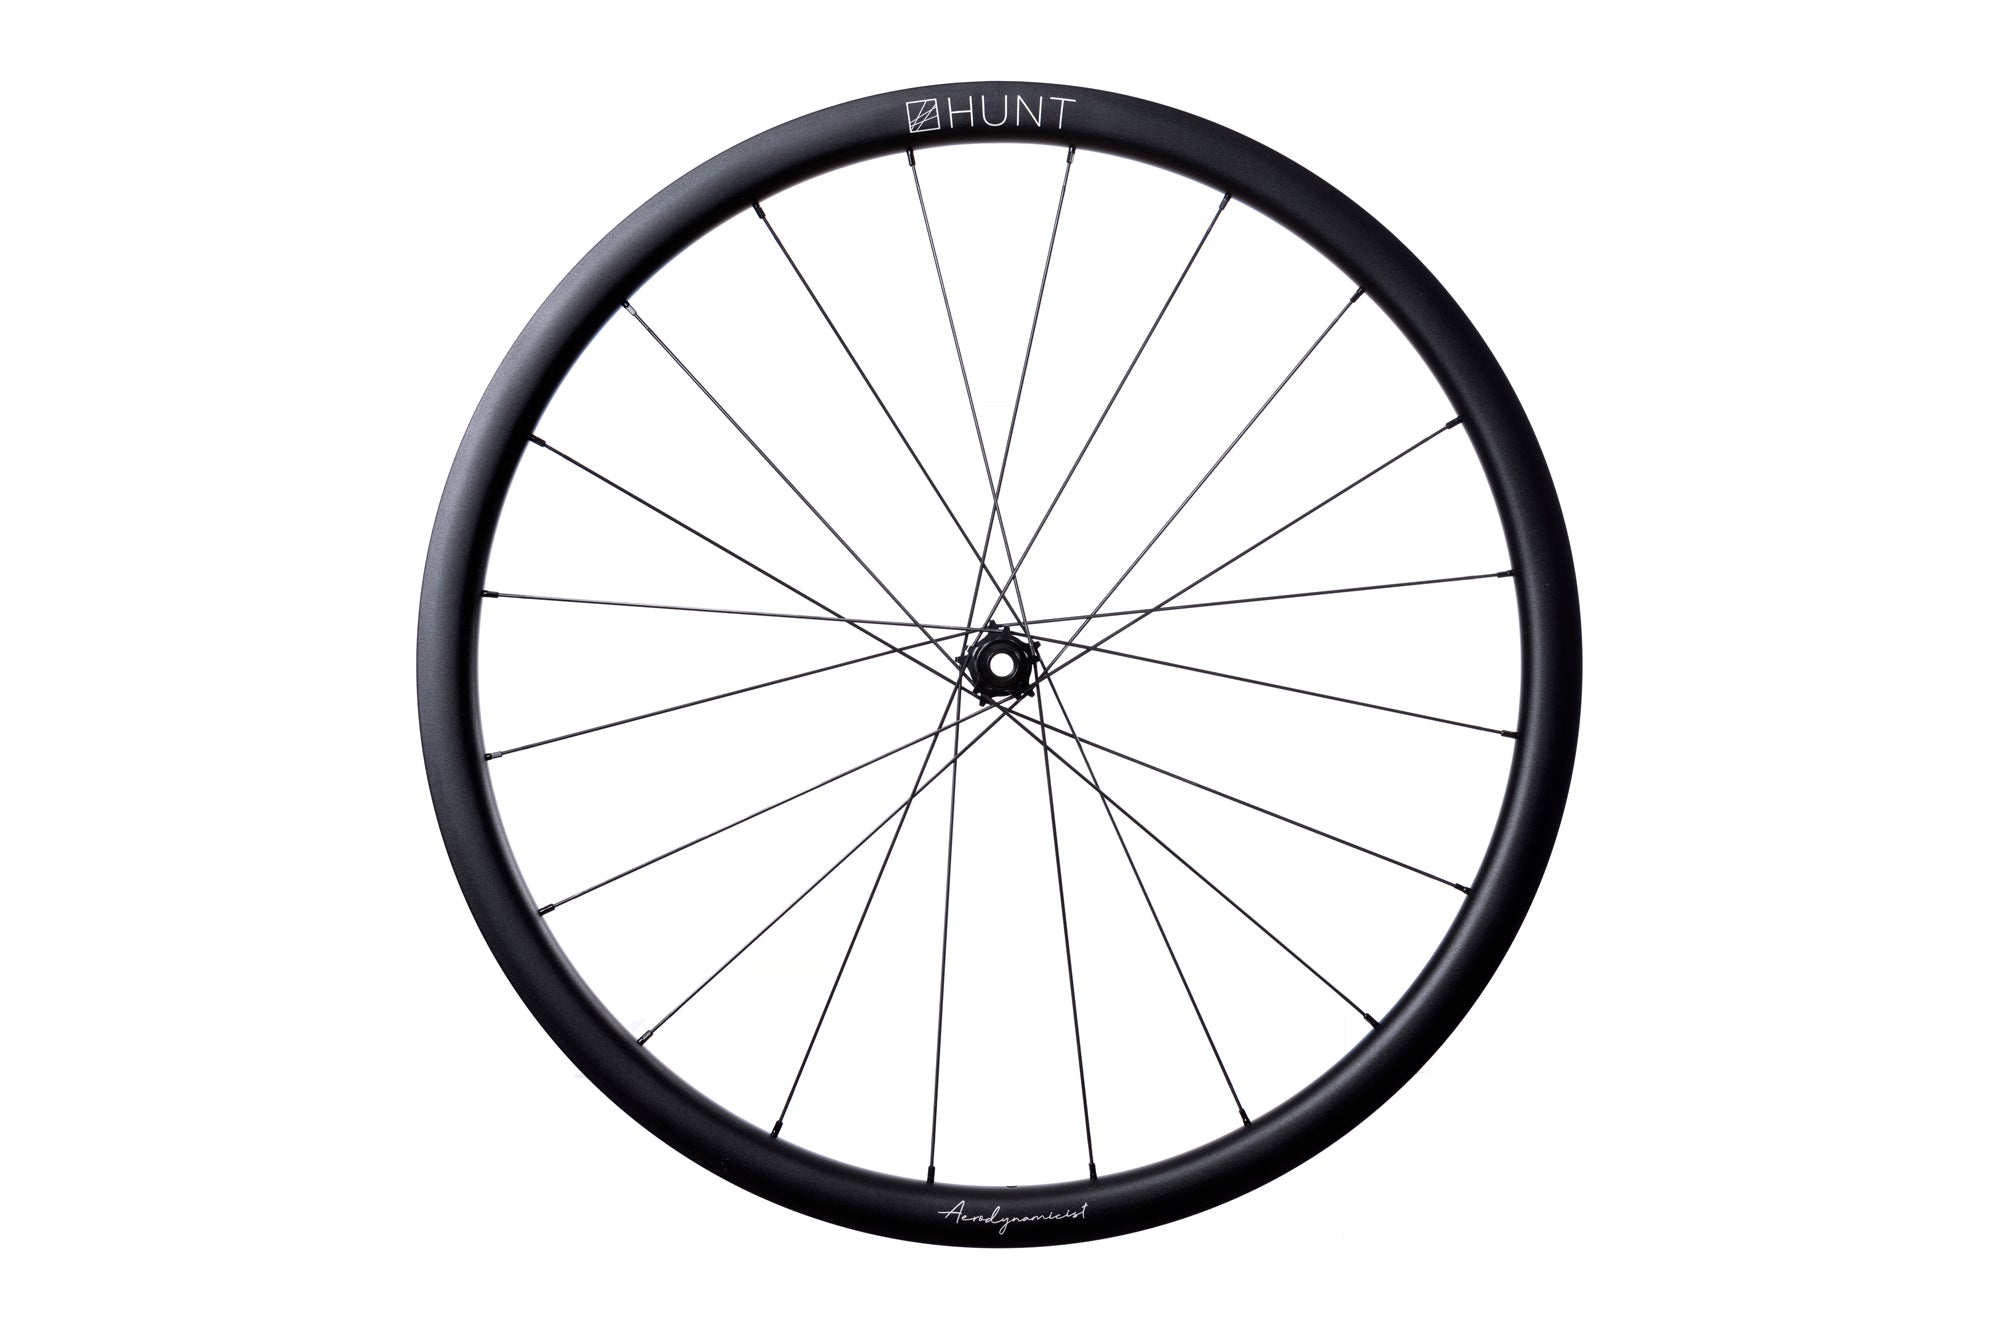 <h1>Rims</h1><i>The broad shape and large radius spoke bed profile (developed by Luisa for the LIMITLESS project allows excellent transfer of airflow from tyre to the rim and then around the spoke bed to ensure low aerodynamic drag at a wide range of yaw angles.</i>